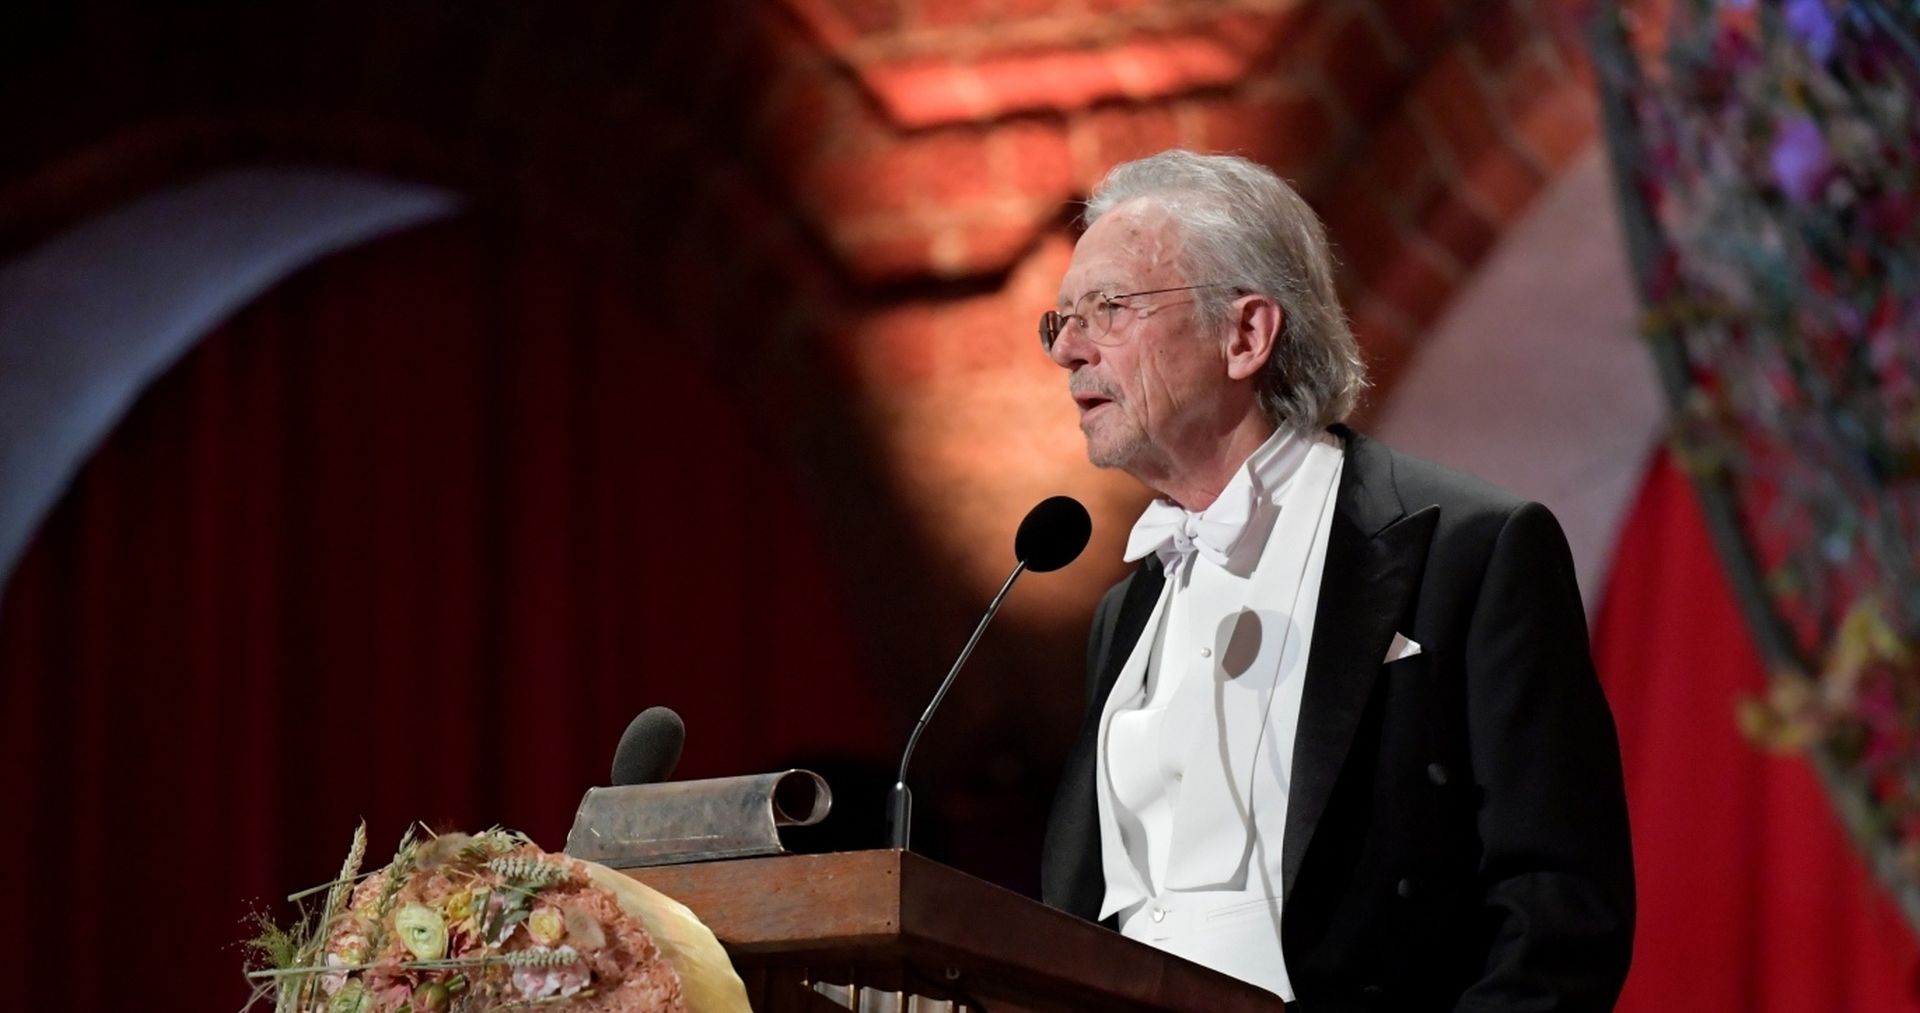 Nobel banquet at Stockholm City Hall, in Stockholm 2019 literature Nobel laureate Peter Handke gives his speech during the Nobel banquet at Stockholm City Hall, in Stockholm, Sweden December 10, 2019.  Anders Wiklund/TT News Agency/via REUTERS      ATTENTION EDITORS - THIS IMAGE WAS PROVIDED BY A THIRD PARTY. SWEDEN OUT. NO COMMERCIAL OR EDITORIAL SALES IN SWEDEN. TT NEWS AGENCY